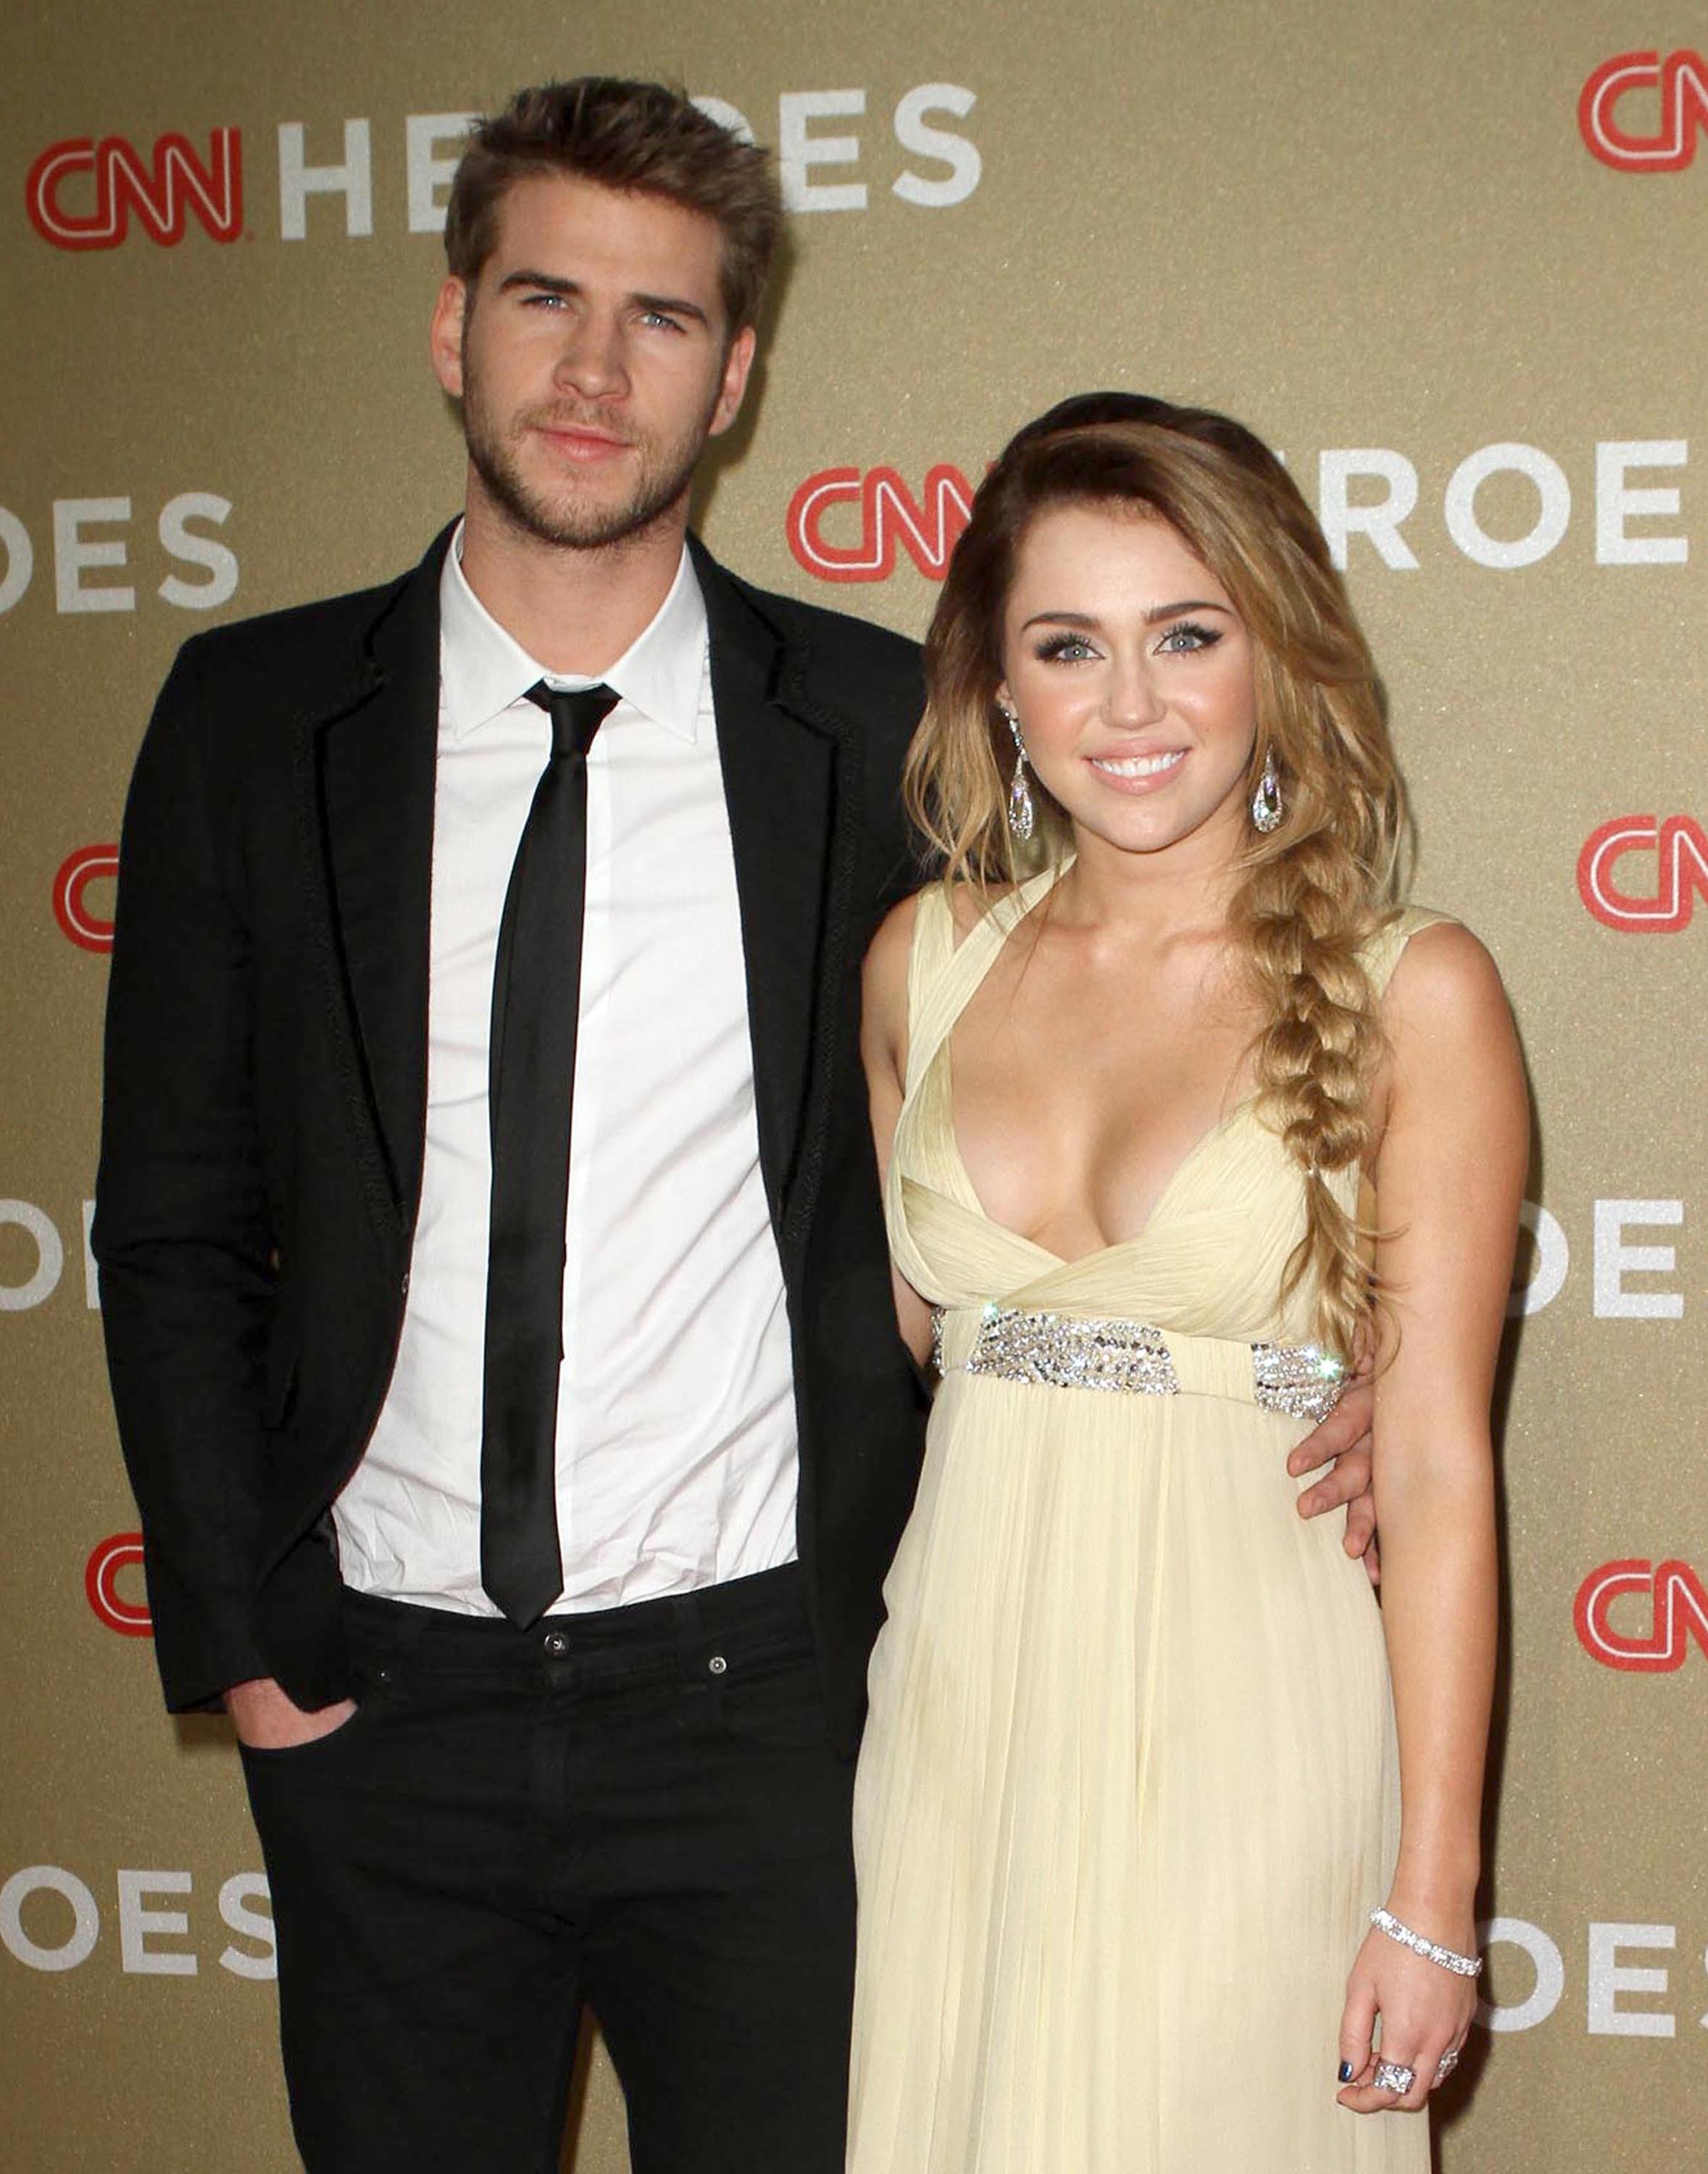 Miley Cyrus and Liam Hemsworth plans to be married after engagement